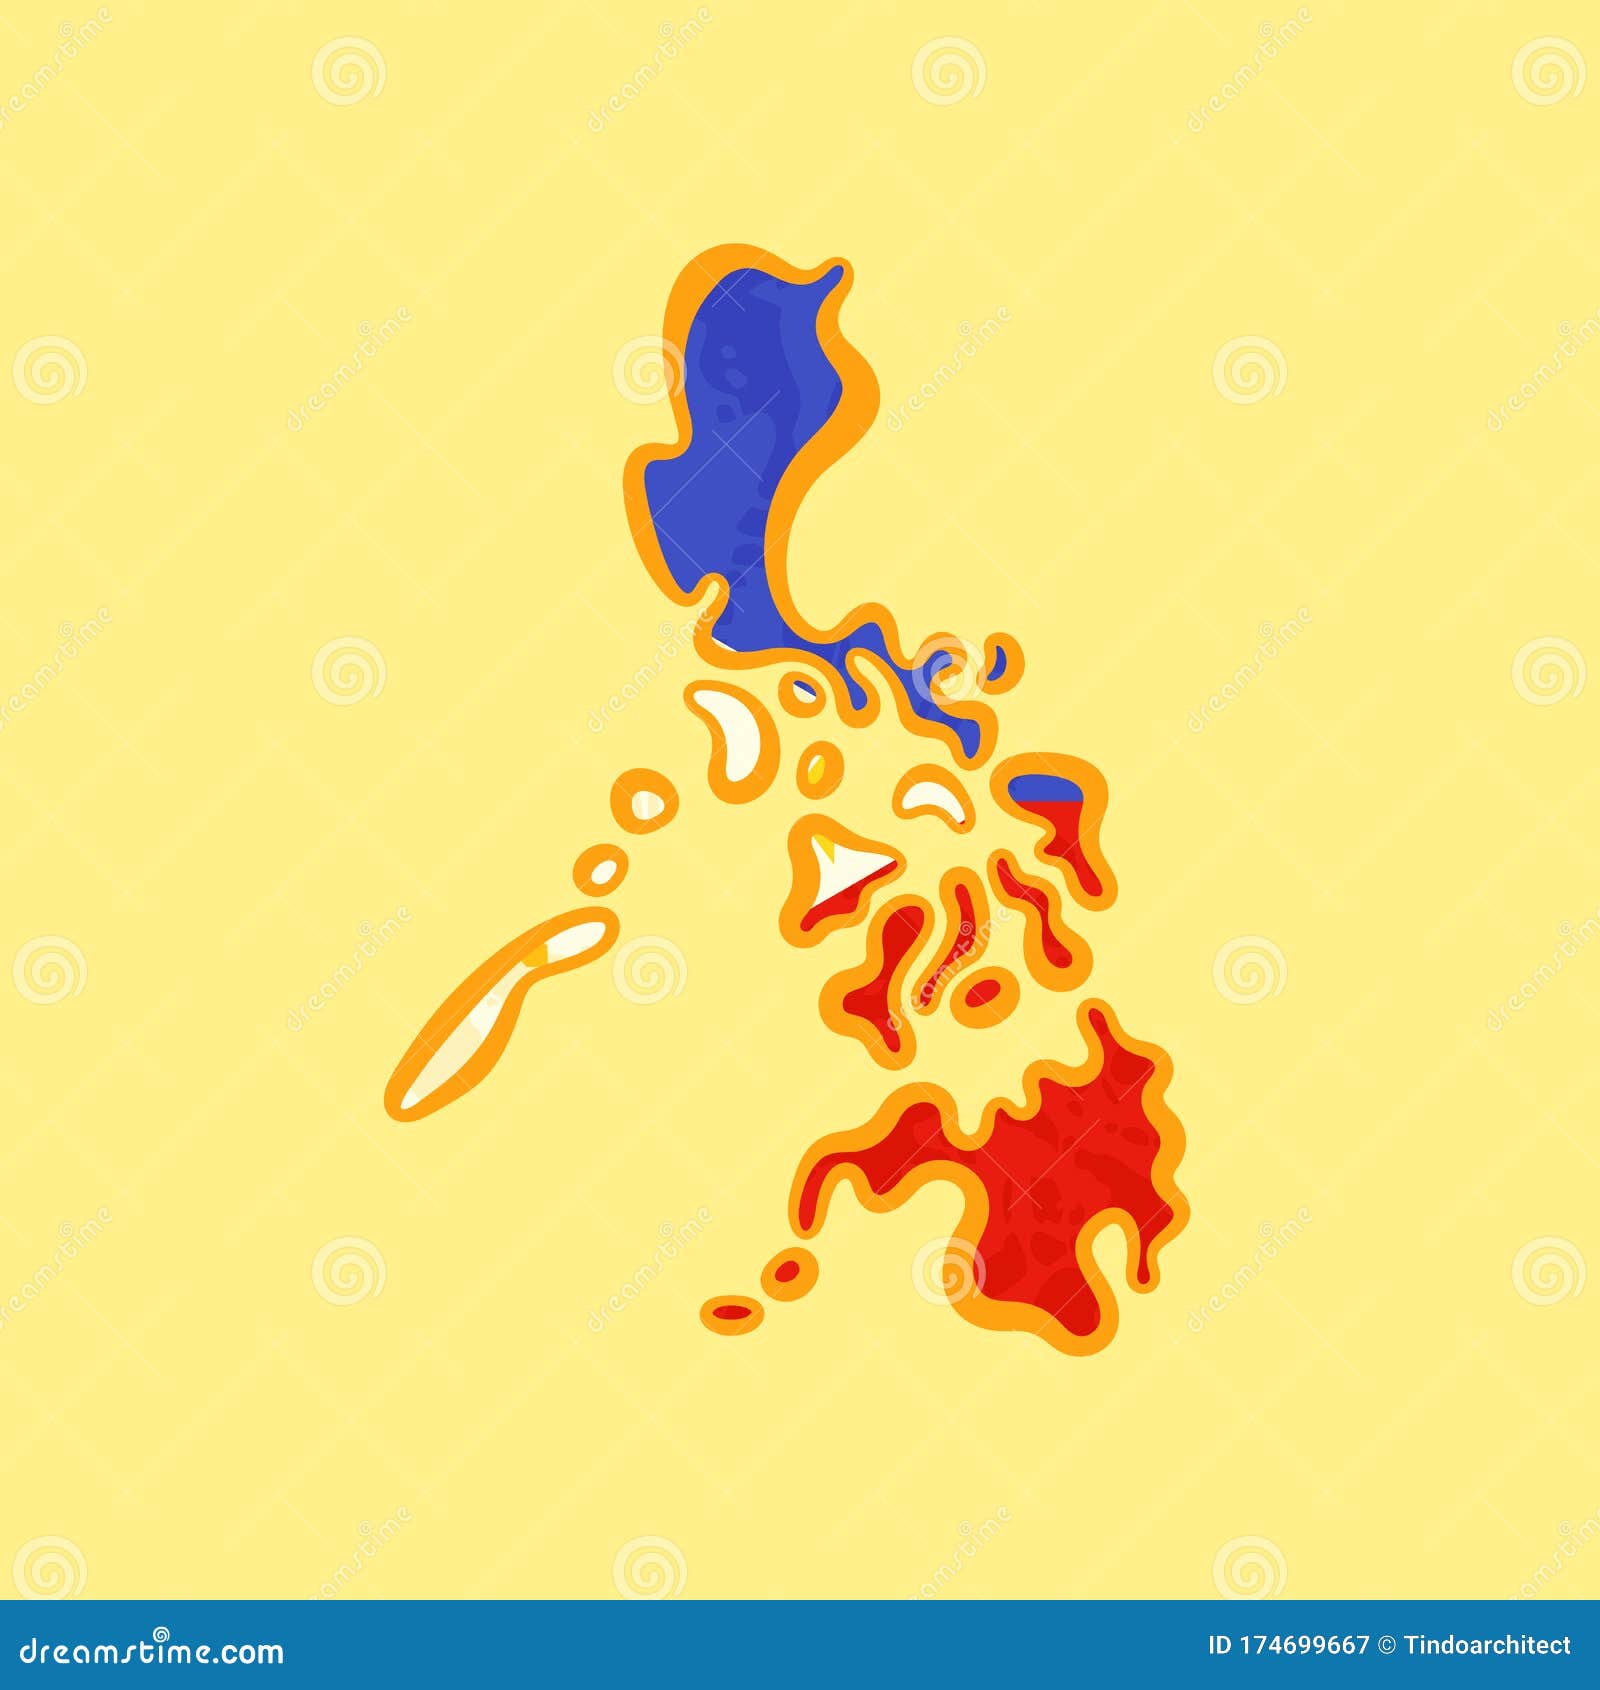 philippines - map colored with philippine flag